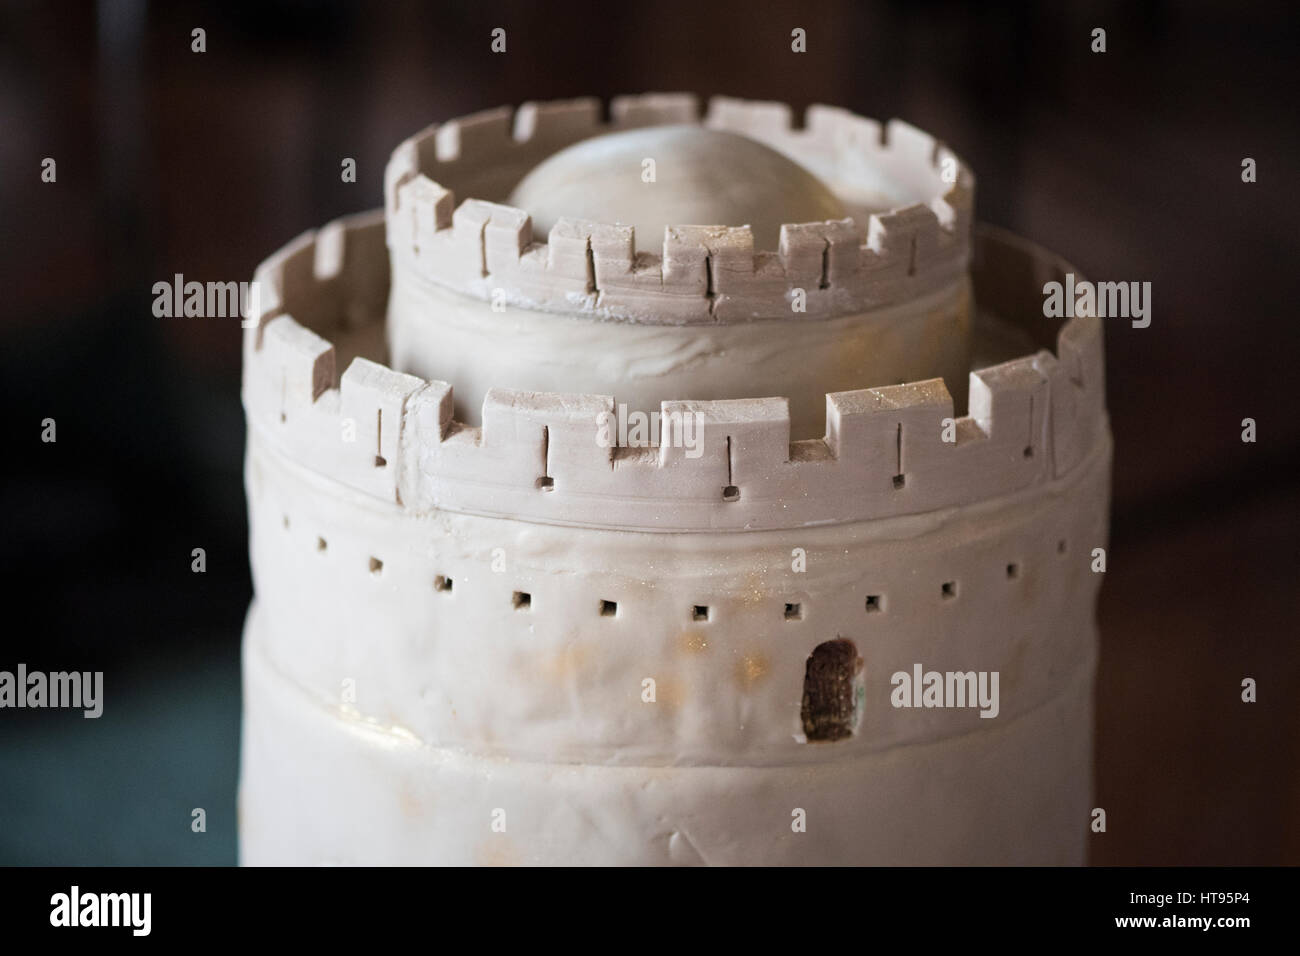 Castle wedding cake inspired by the great keep at Pembroke castle in Wales Stock Photo